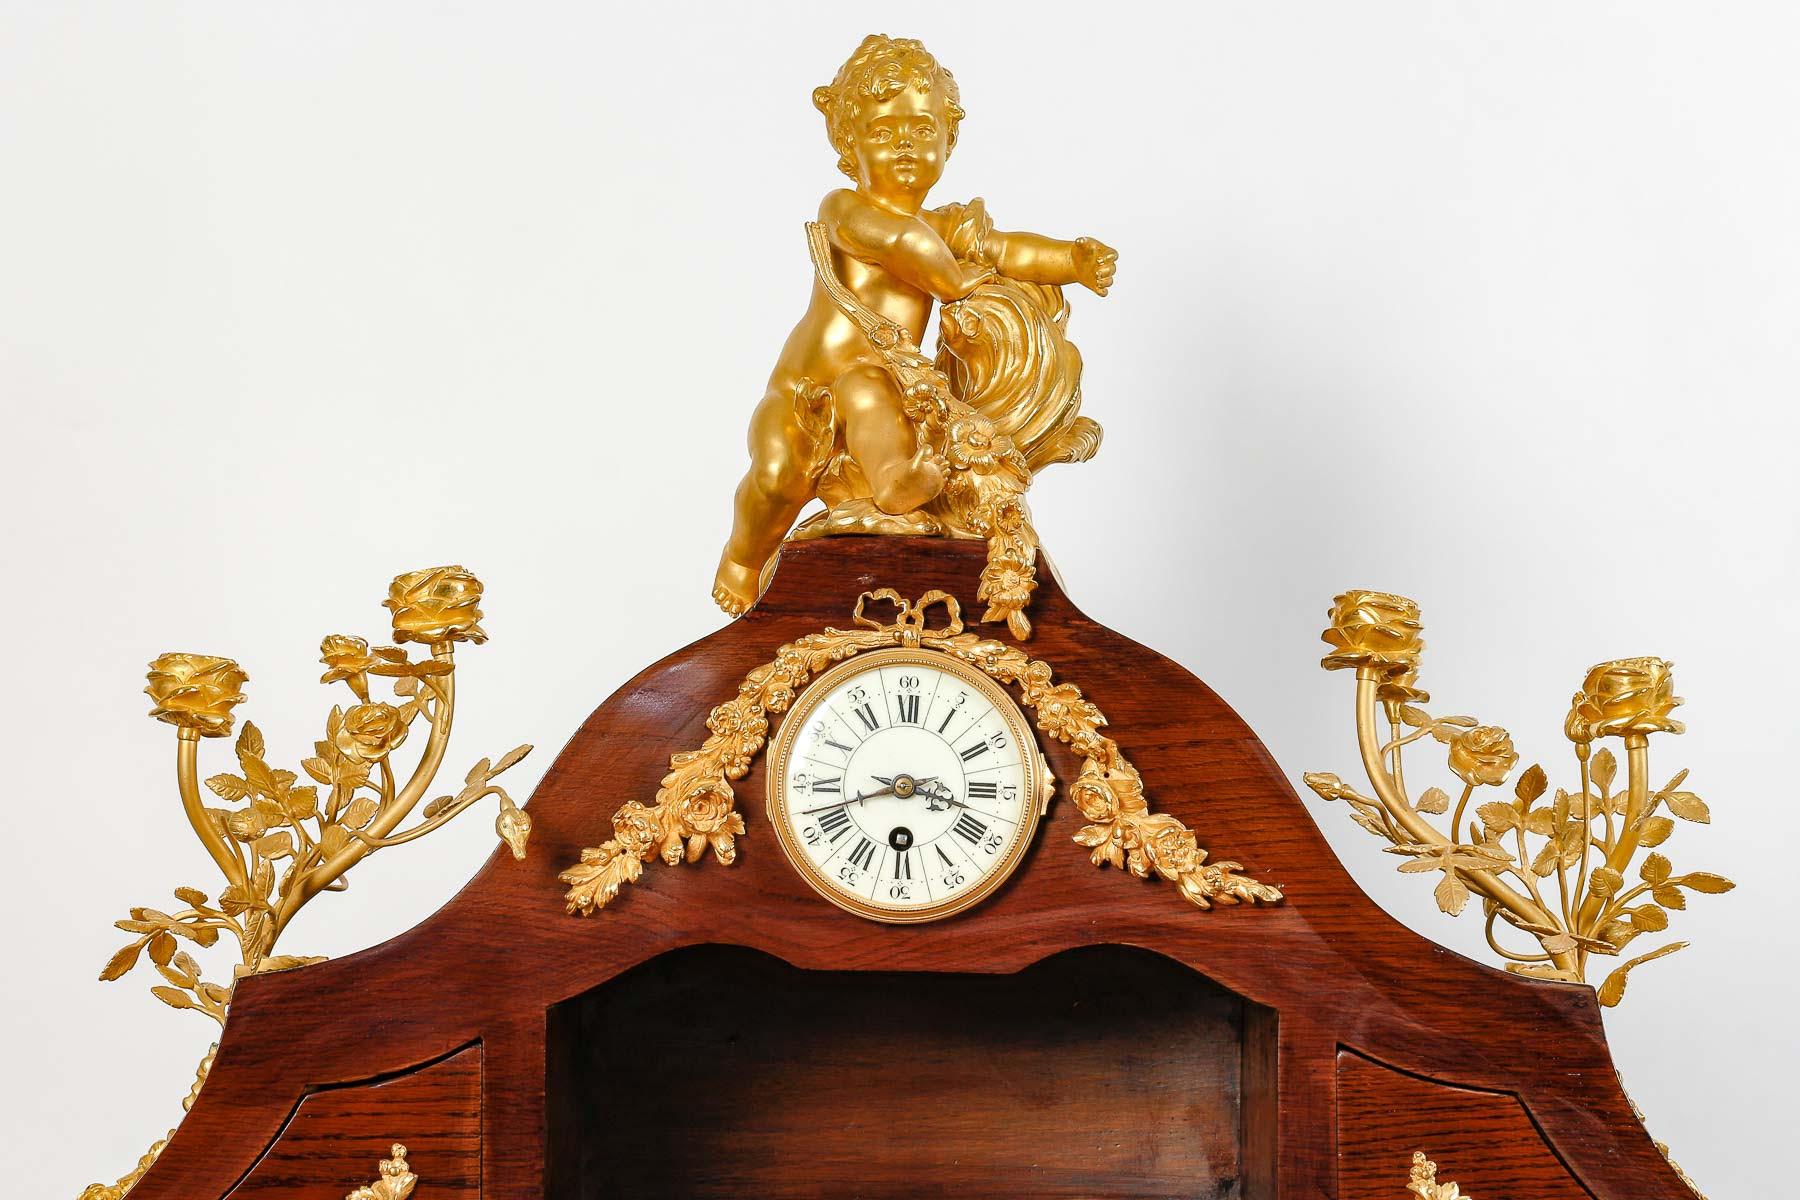 Mahogany and gilt bronze Rognon desk, Grande Décoration.

Napoleon III style Rognon desk in mahogany and gilt and chased bronze, pair of sconces on either side, surmounted by a little girl, central clock, 19th century or early 20th century, with its